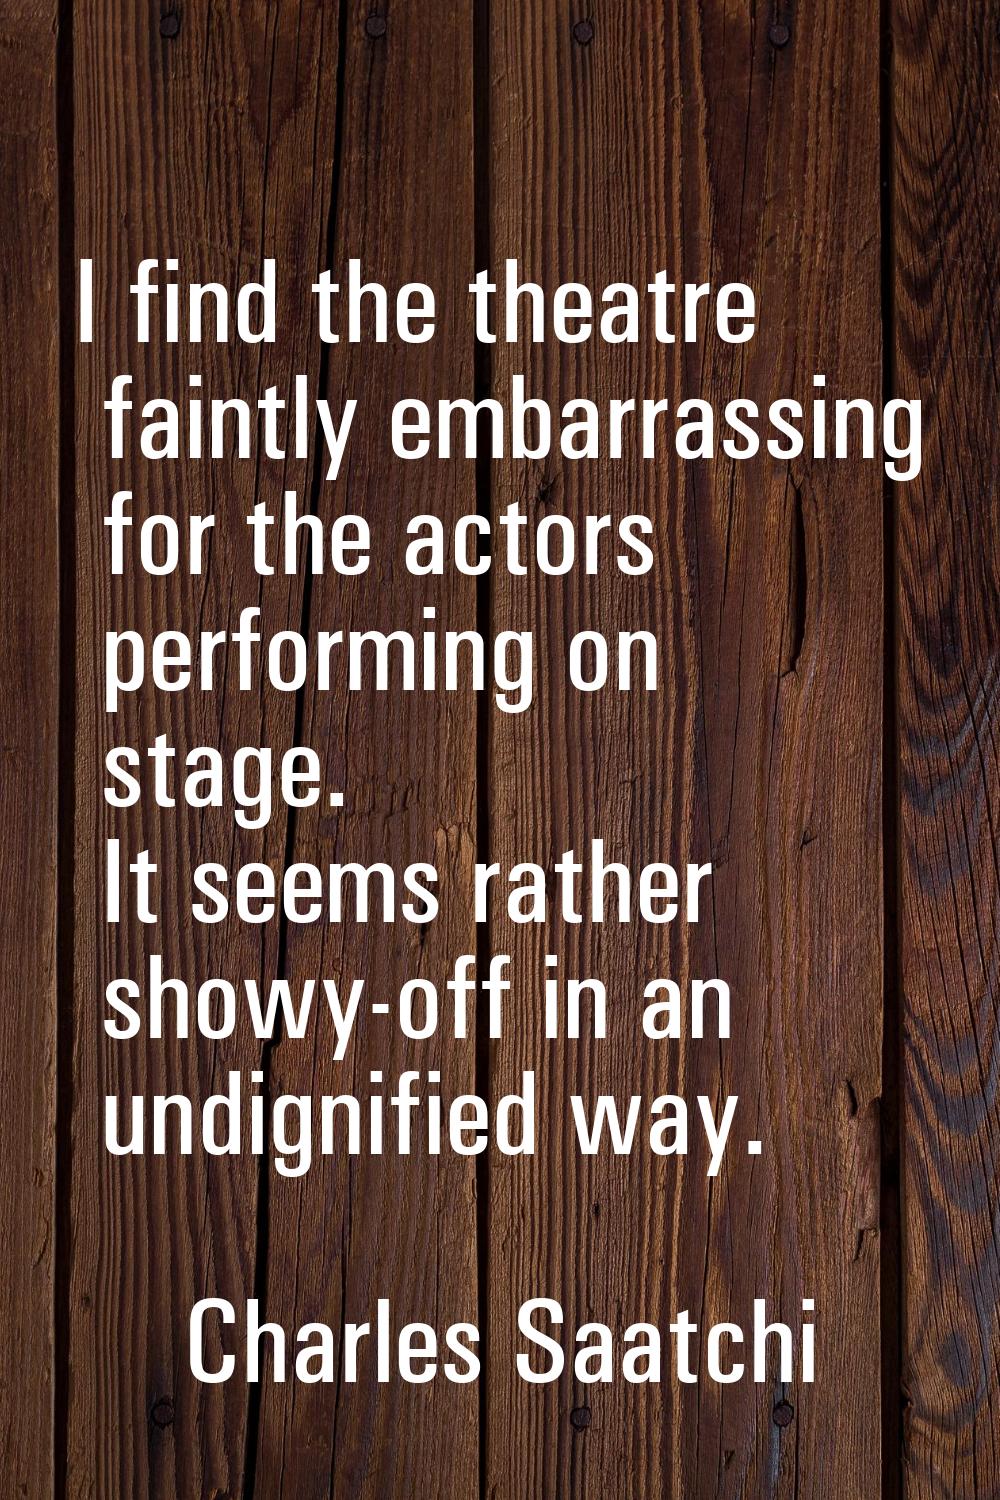 I find the theatre faintly embarrassing for the actors performing on stage. It seems rather showy-o